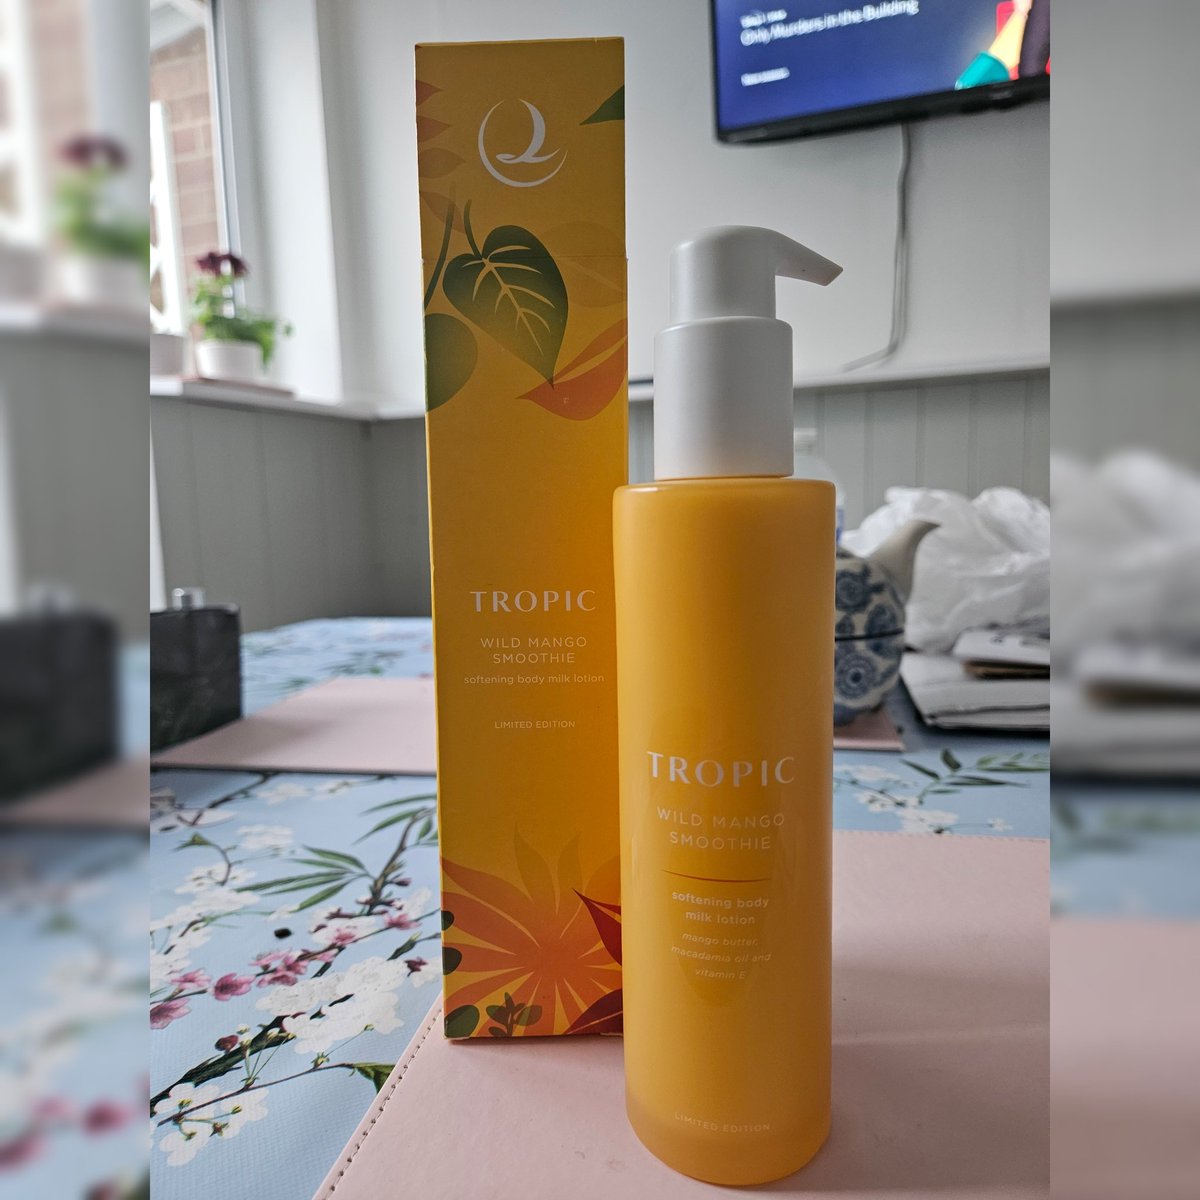 This stuff is amazing, smelling like a mango all day @TropicSkincare #lovetropic